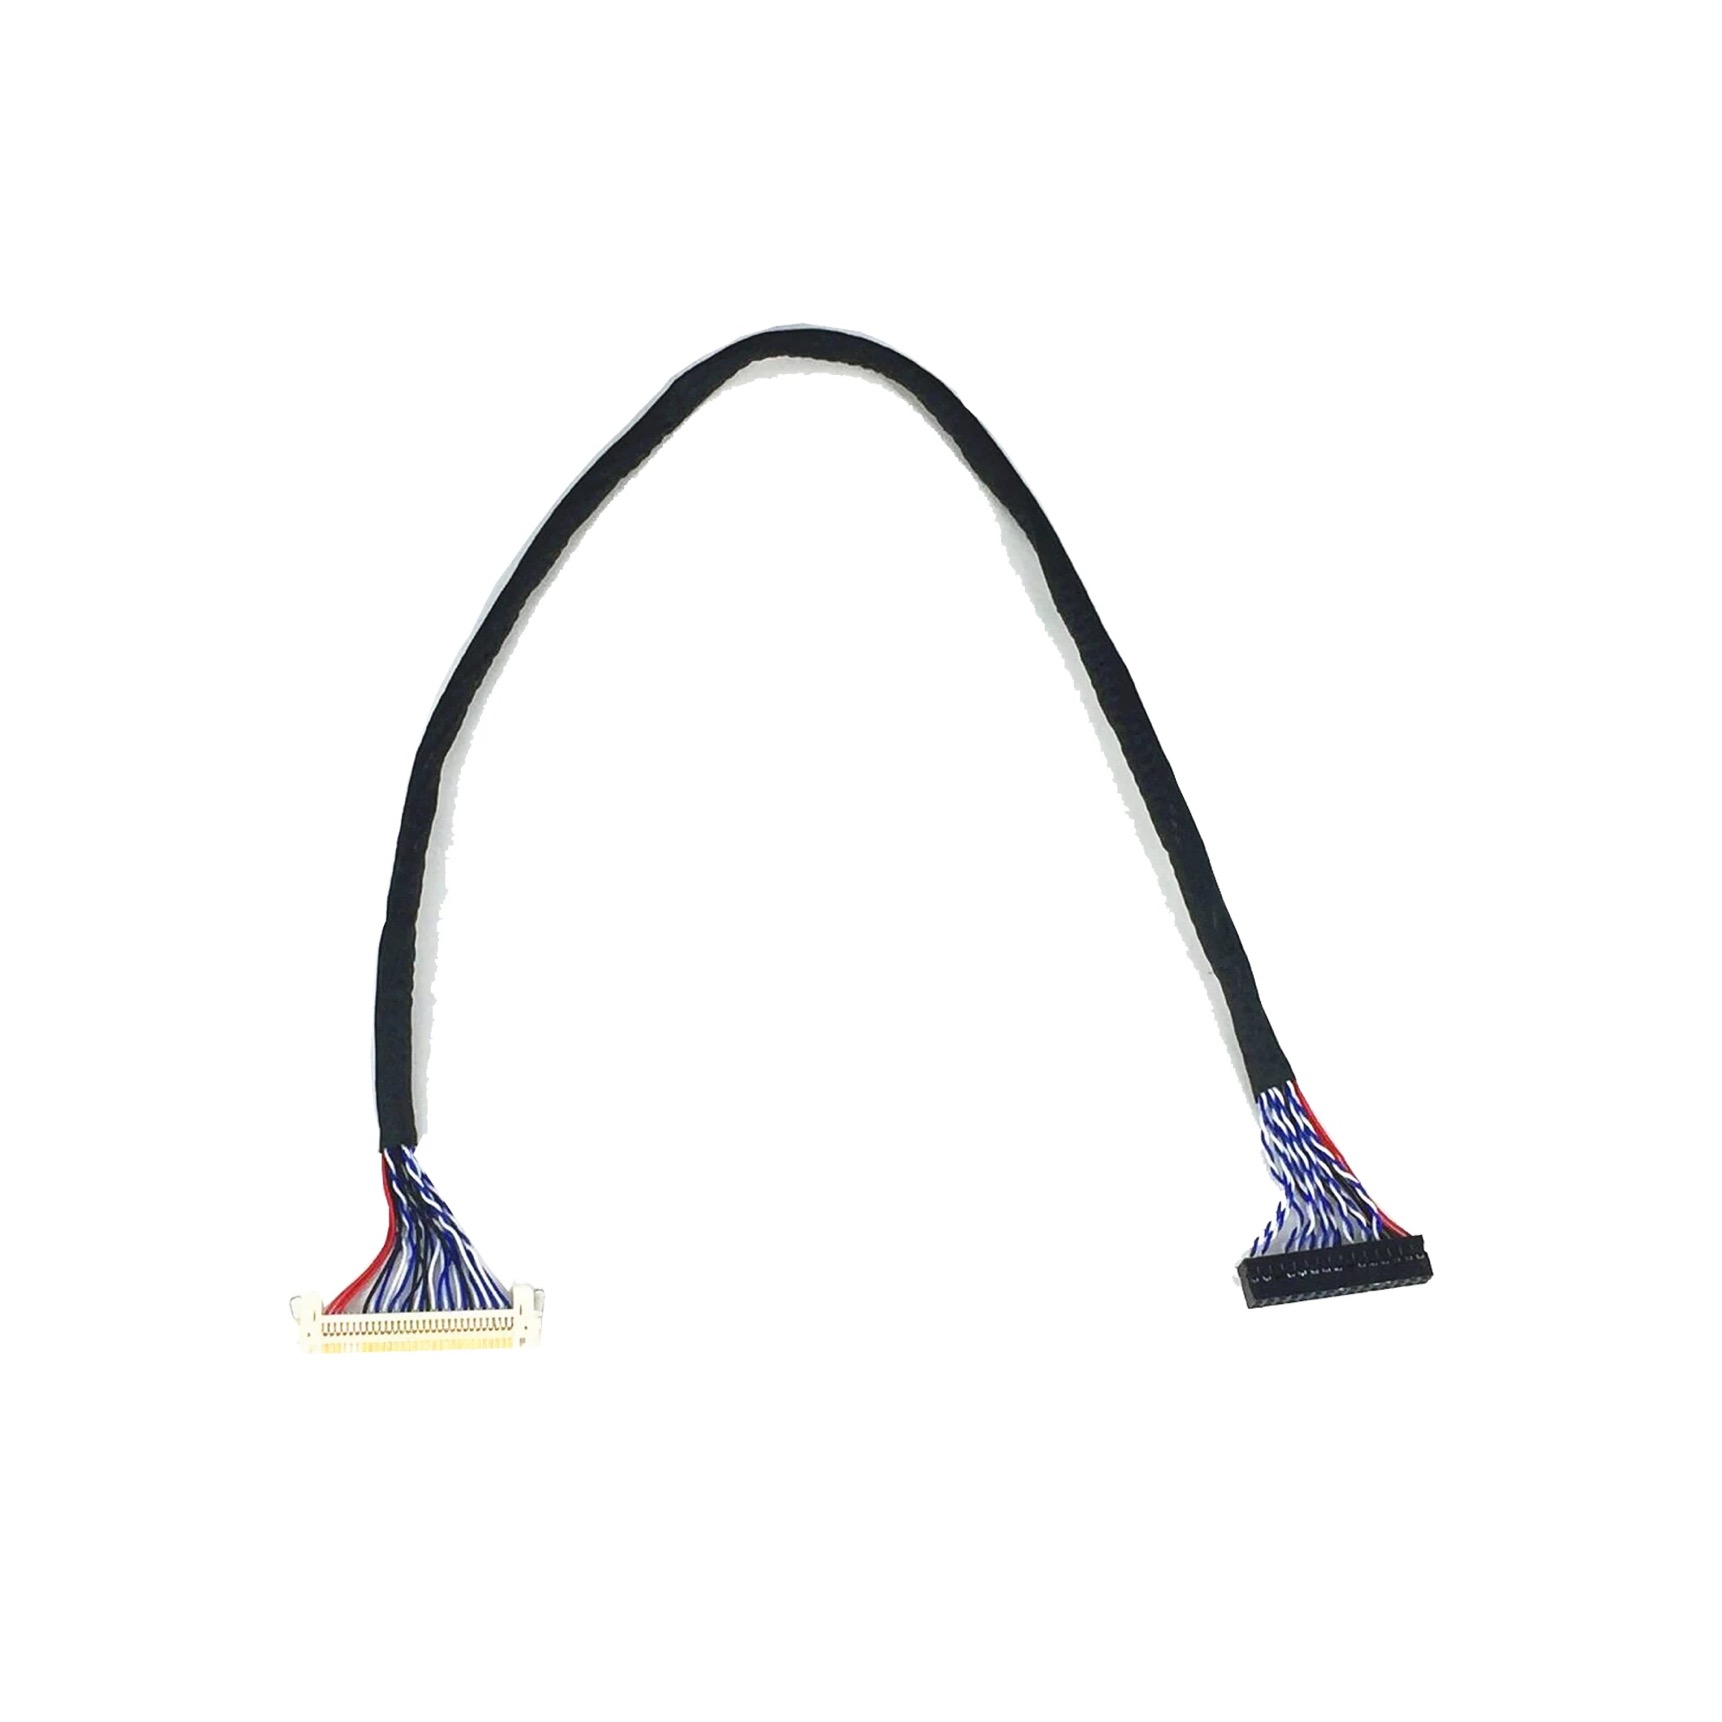 JHT LVDS screen wire Lvds Cable High Speed 4k univerlsal Hd screen line for mother board china tv parts factory supplier 